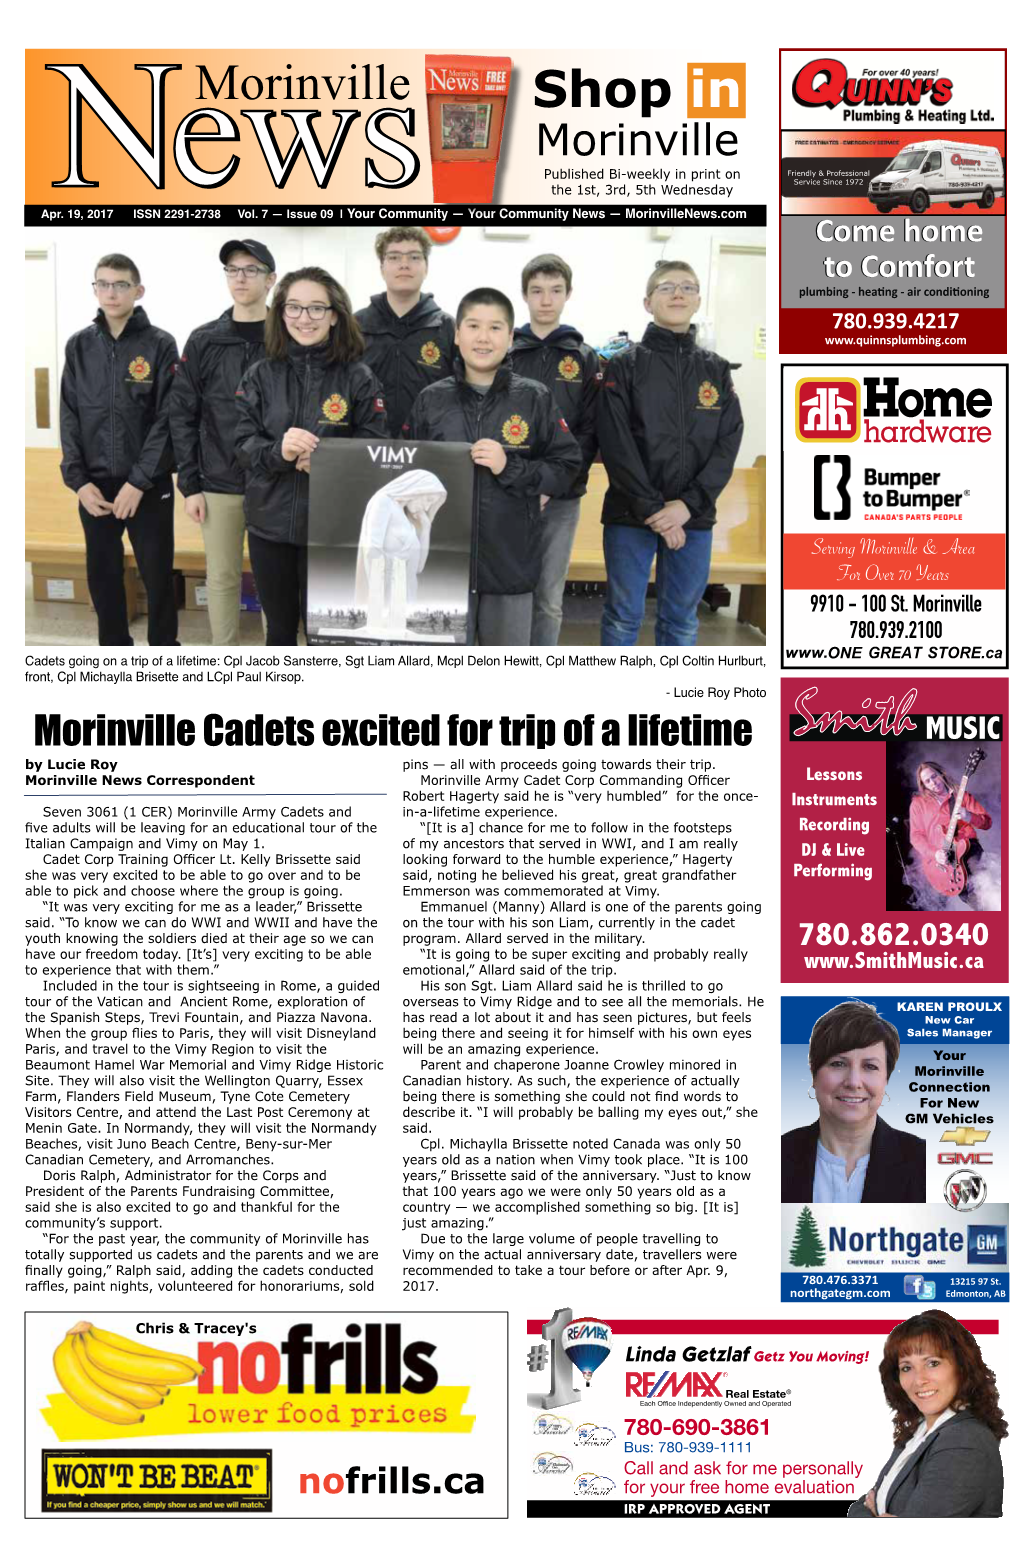 Morinville Cadets Excited for Trip of a Lifetime by Lucie Roy Pins — All with Proceeds Going Towards Their Trip